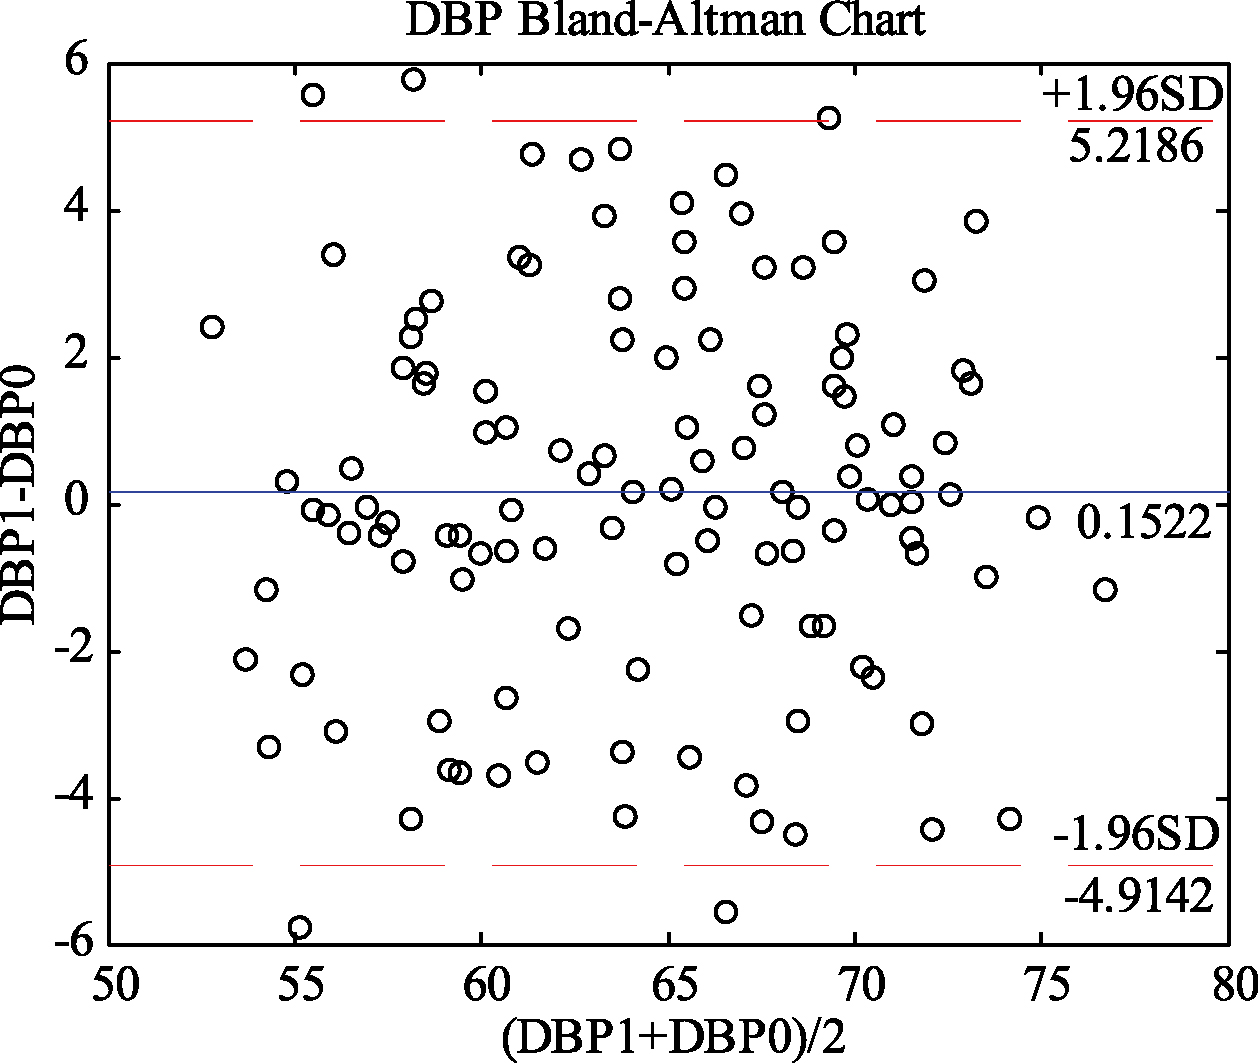 Bland-Altman analysis of predicted and measured DBP values (DBP1 and DBP0).